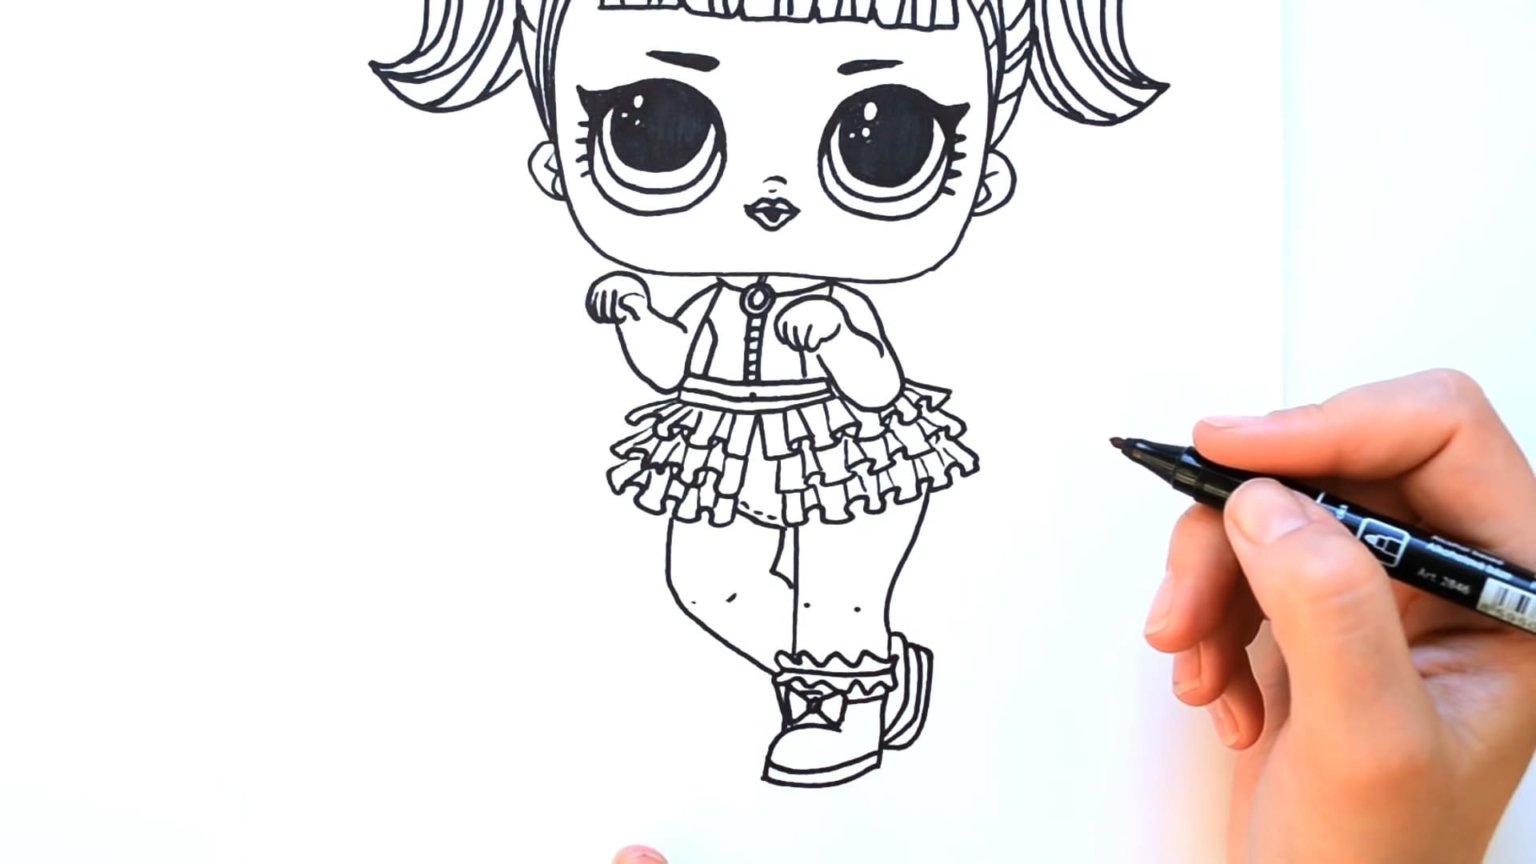 How to draw LOL doll with pencil according to instructions fast and easy